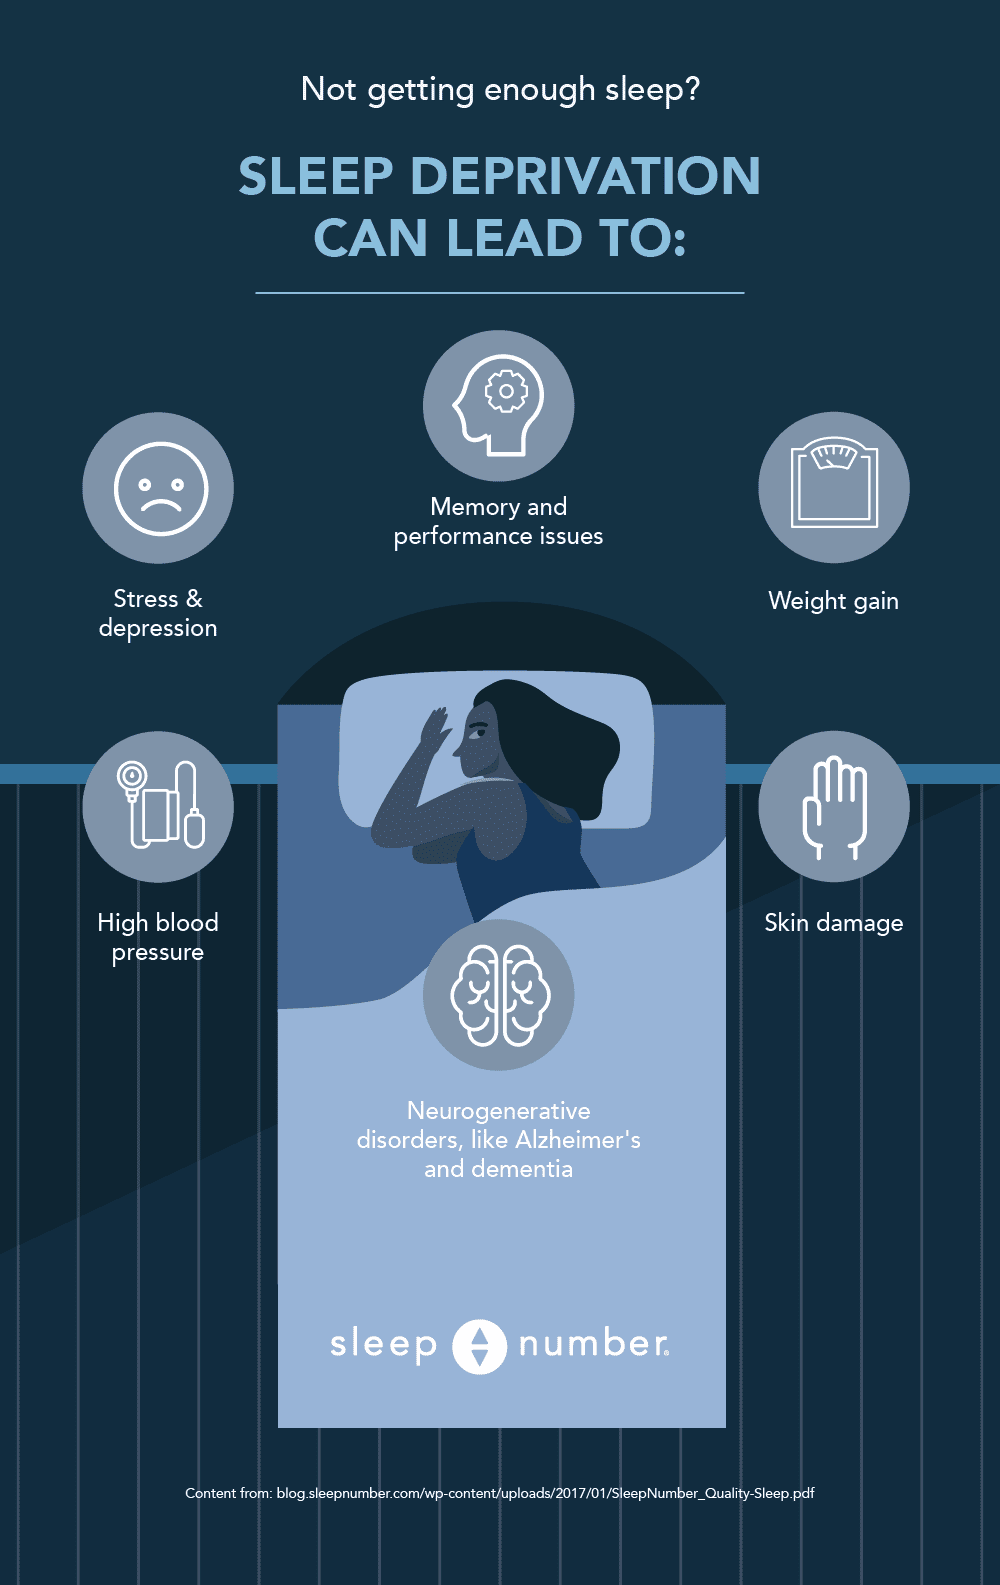 Infographic detailing the effects of sleep deprivation including high blood pressure, stress, depression, memory and performance issues, weight gain, and skin damage.